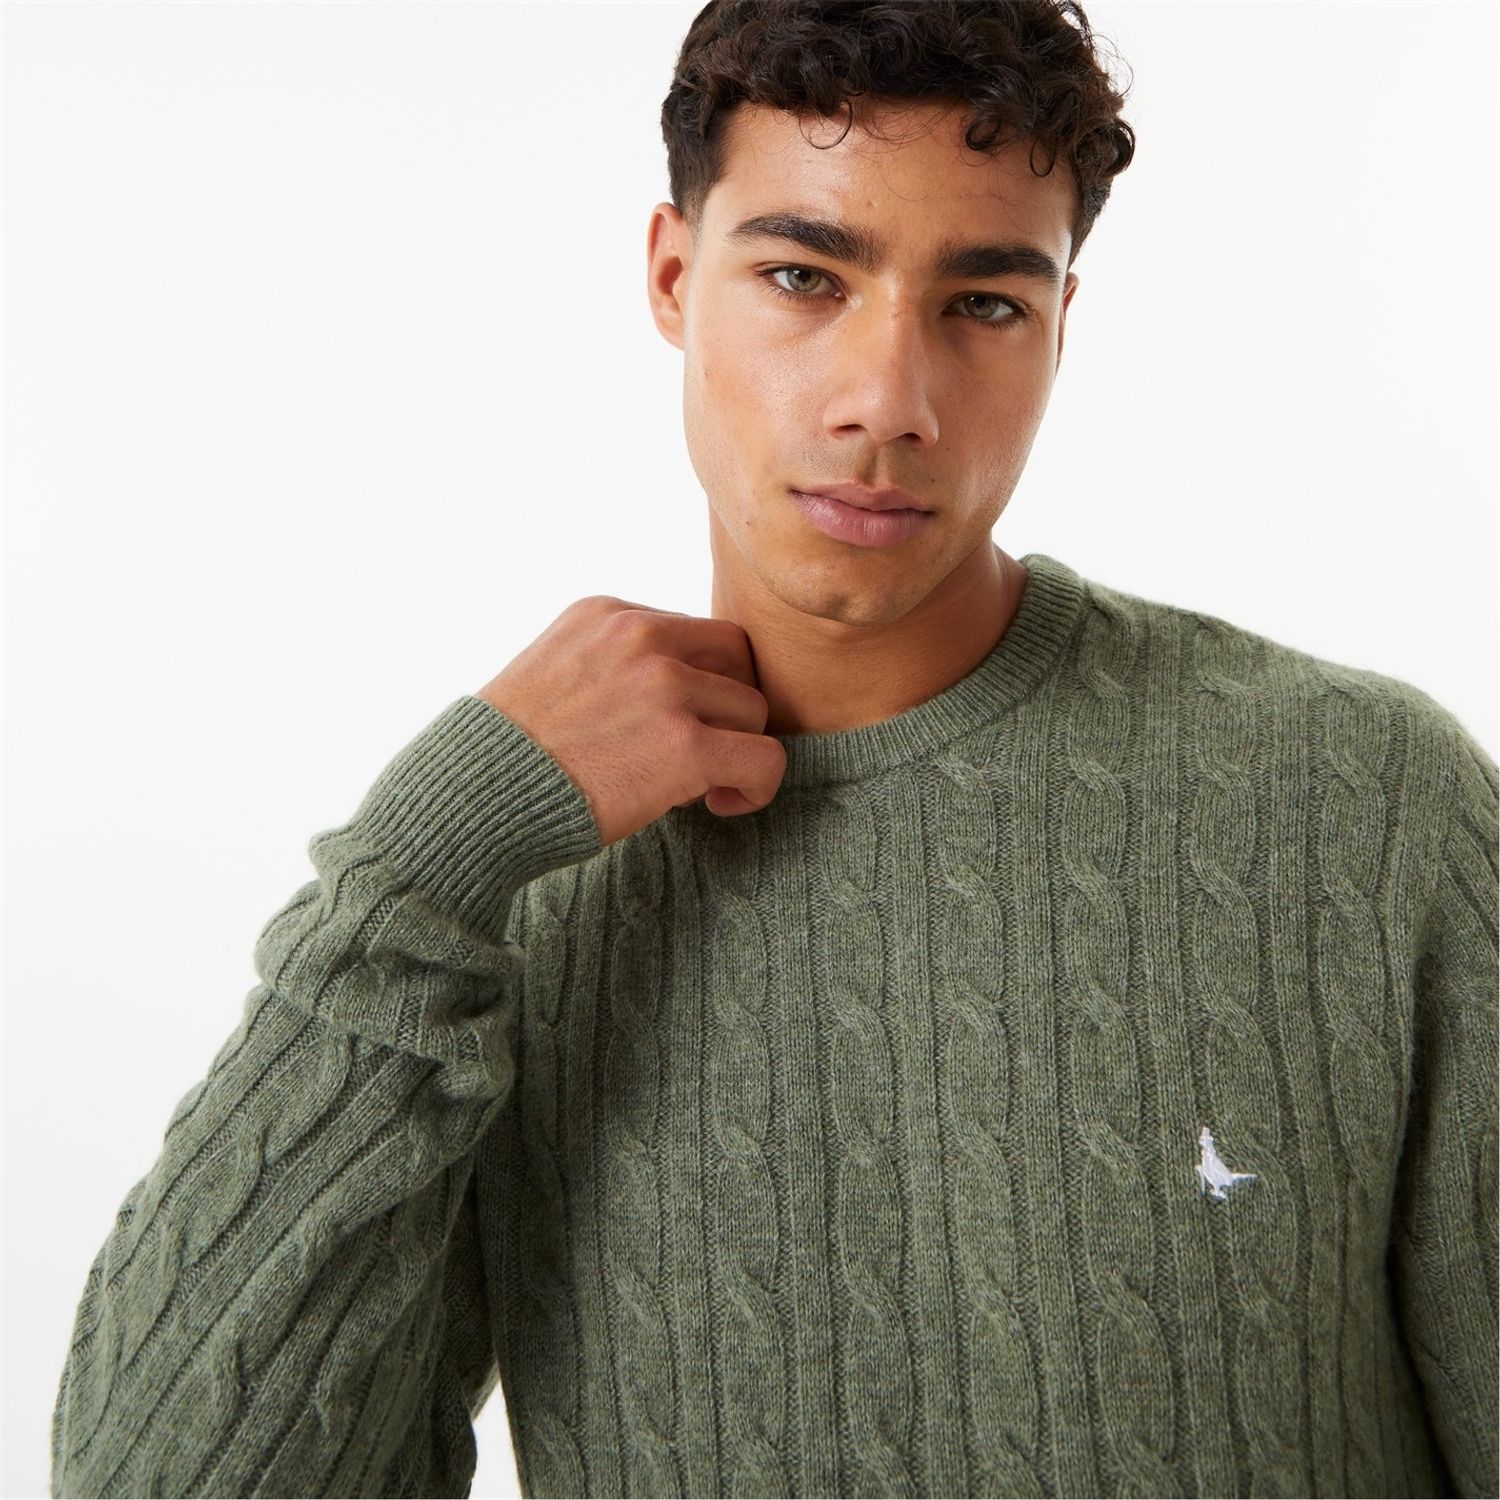 Jack Wills Marlow Merino Wool Blend Cable Knitted Jumper